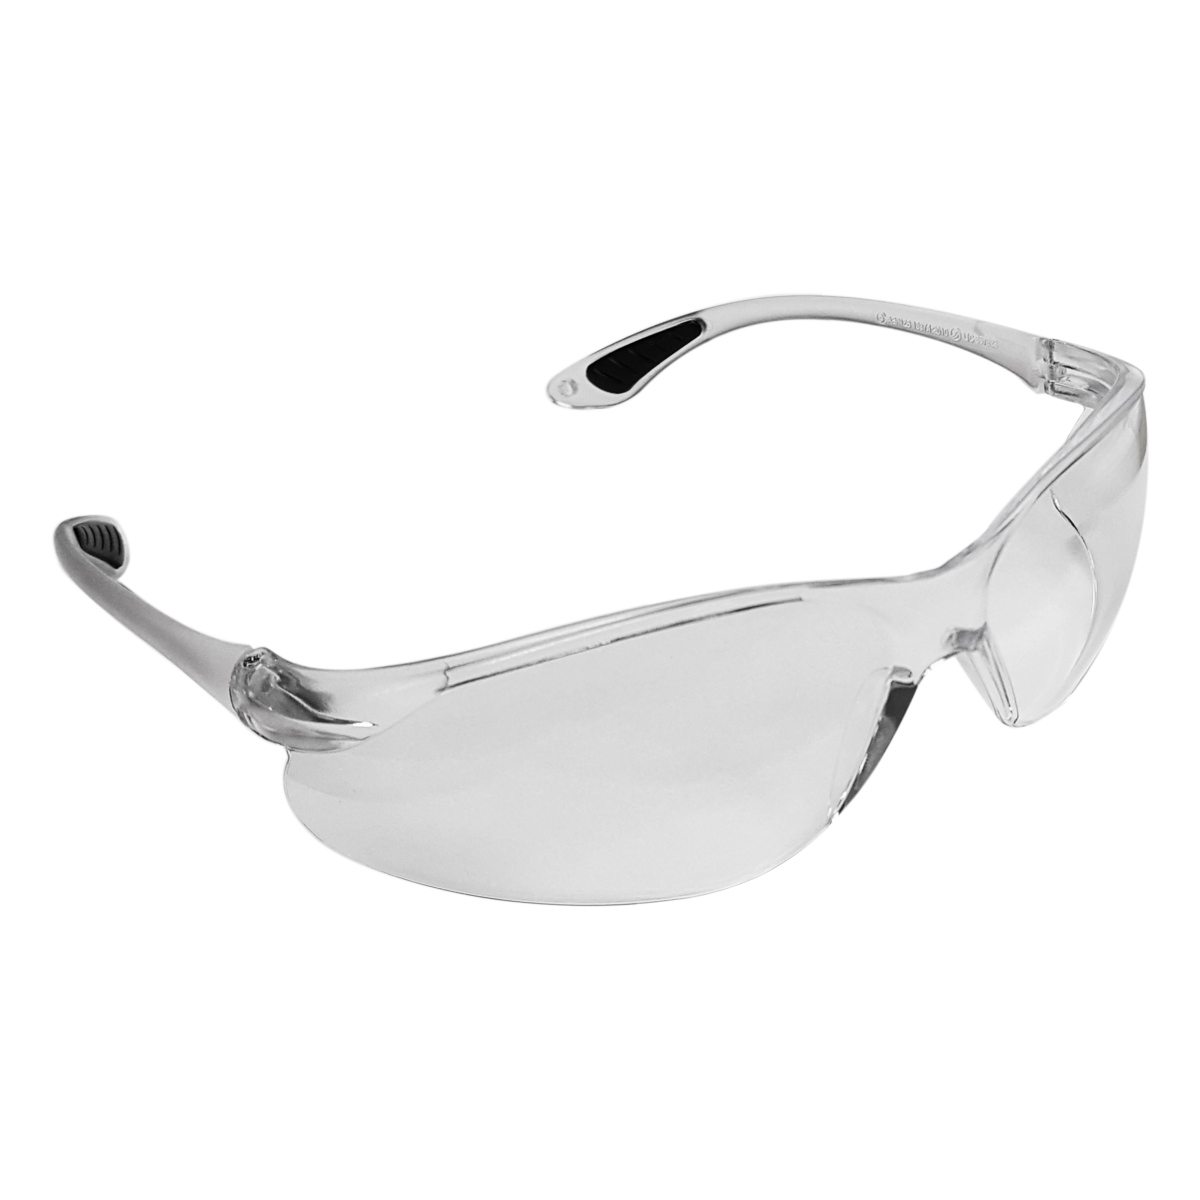 TetraSpec Safety Glasses Smoke or Clear